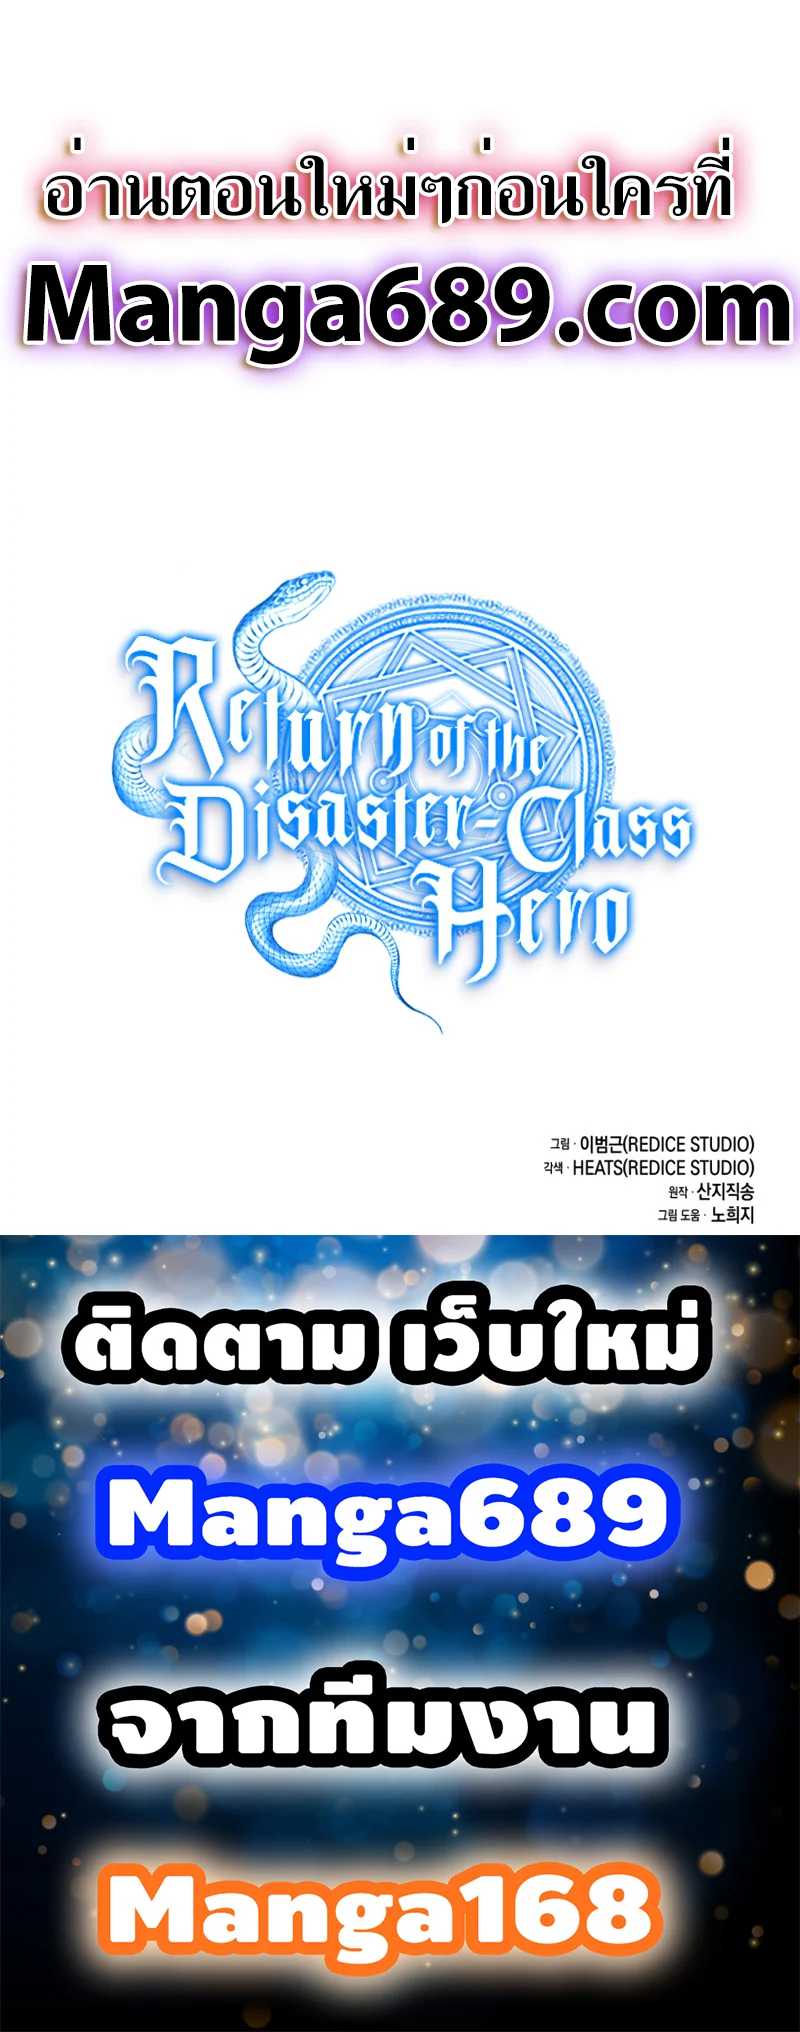 The Return of The Disaster-Class Hero - หน้า 11